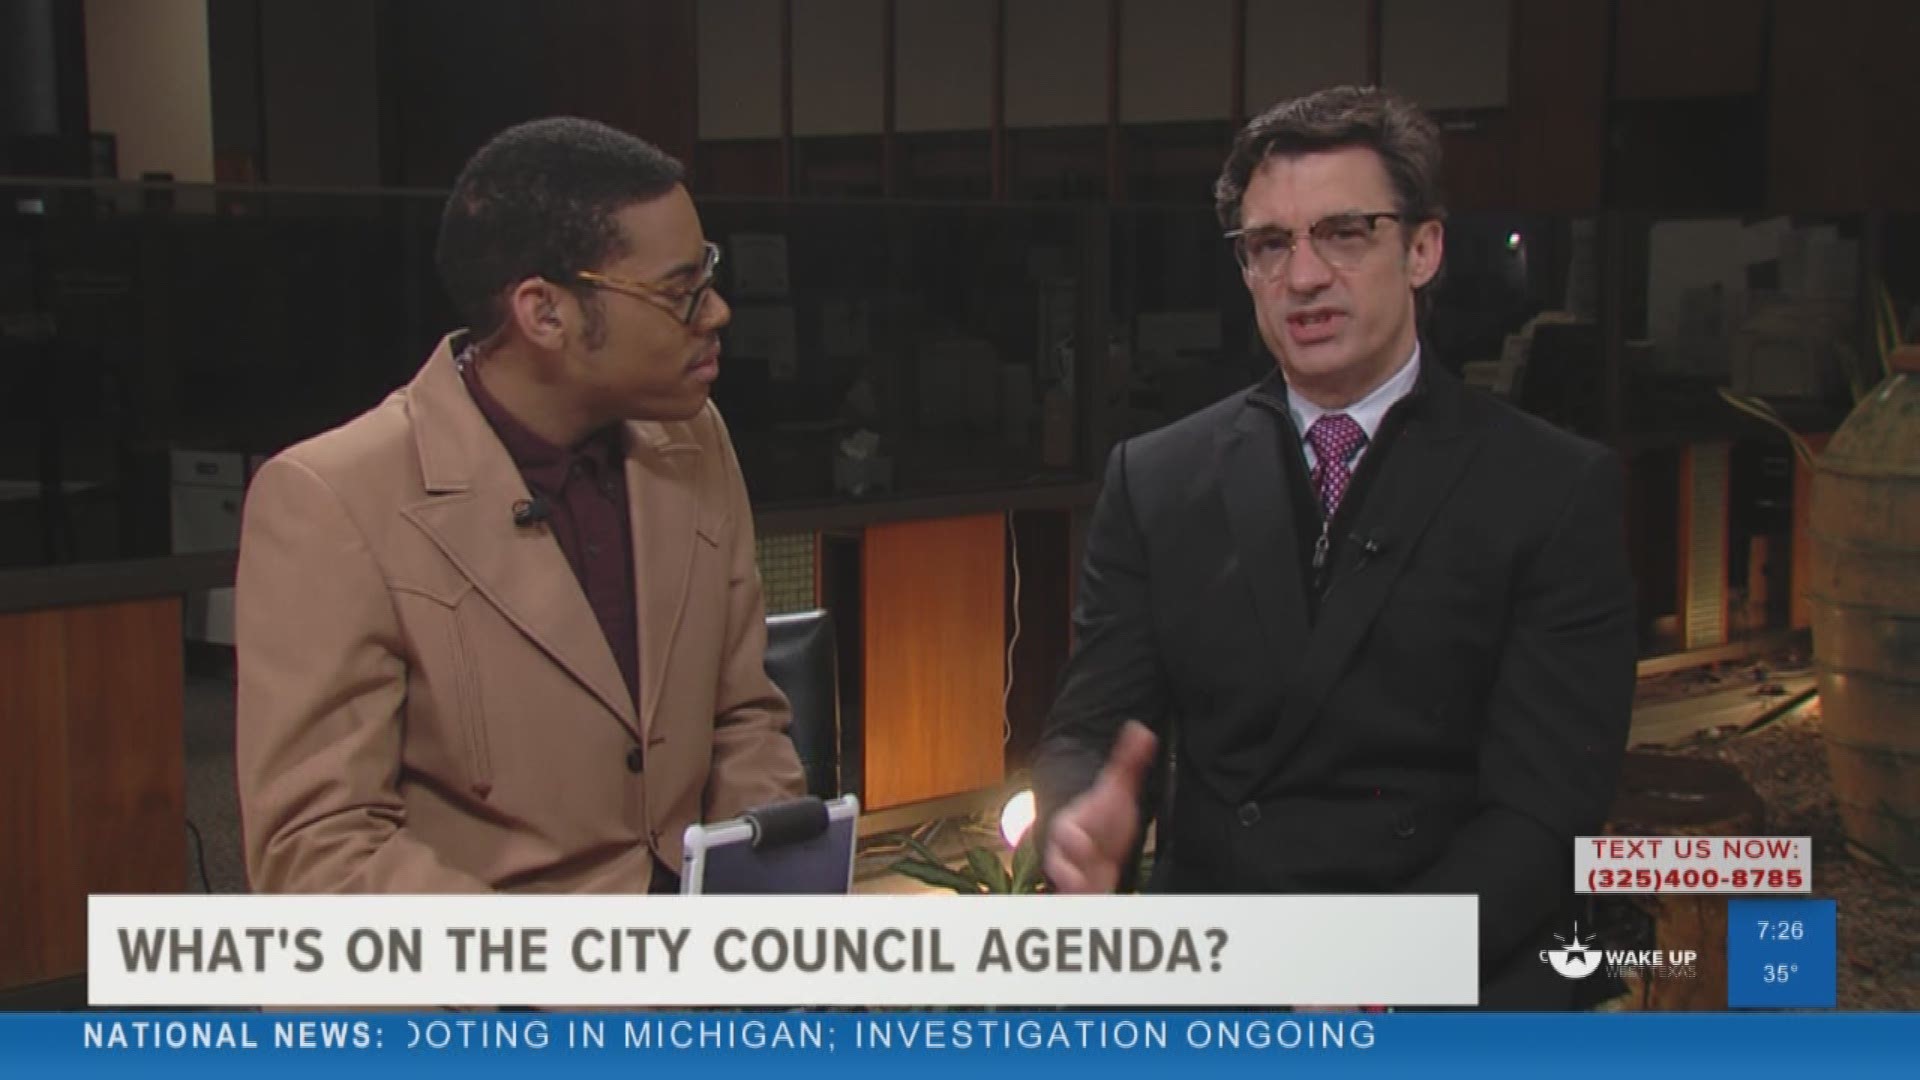 Our Malik Mingo spoke with the City of San Angelo about what's on the agenda for city council.